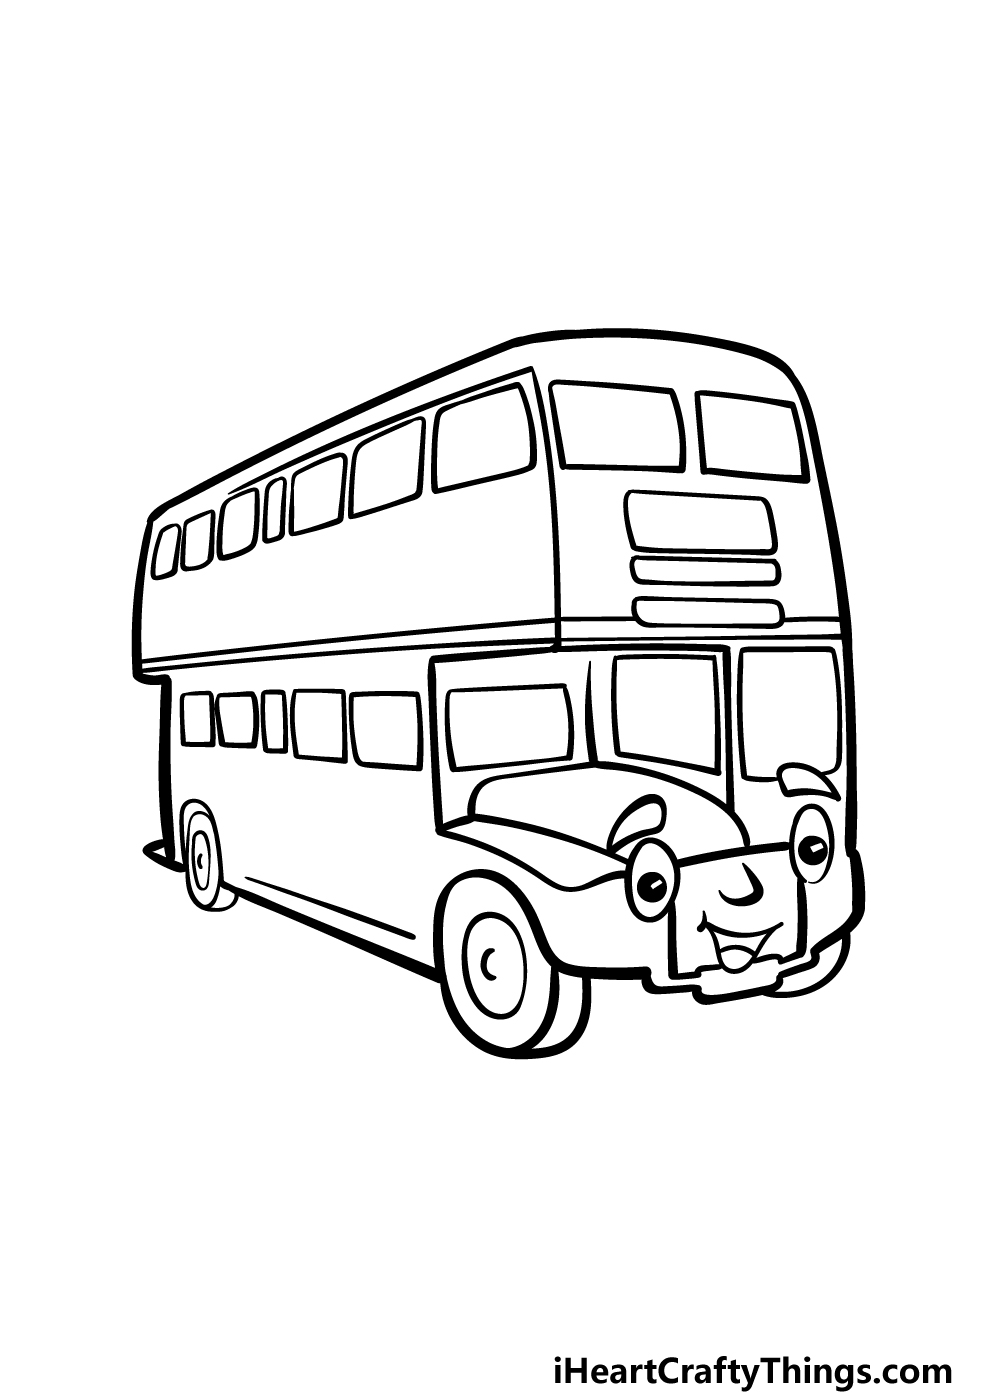 Bus Drawing - How To Draw A Bus Step By Step